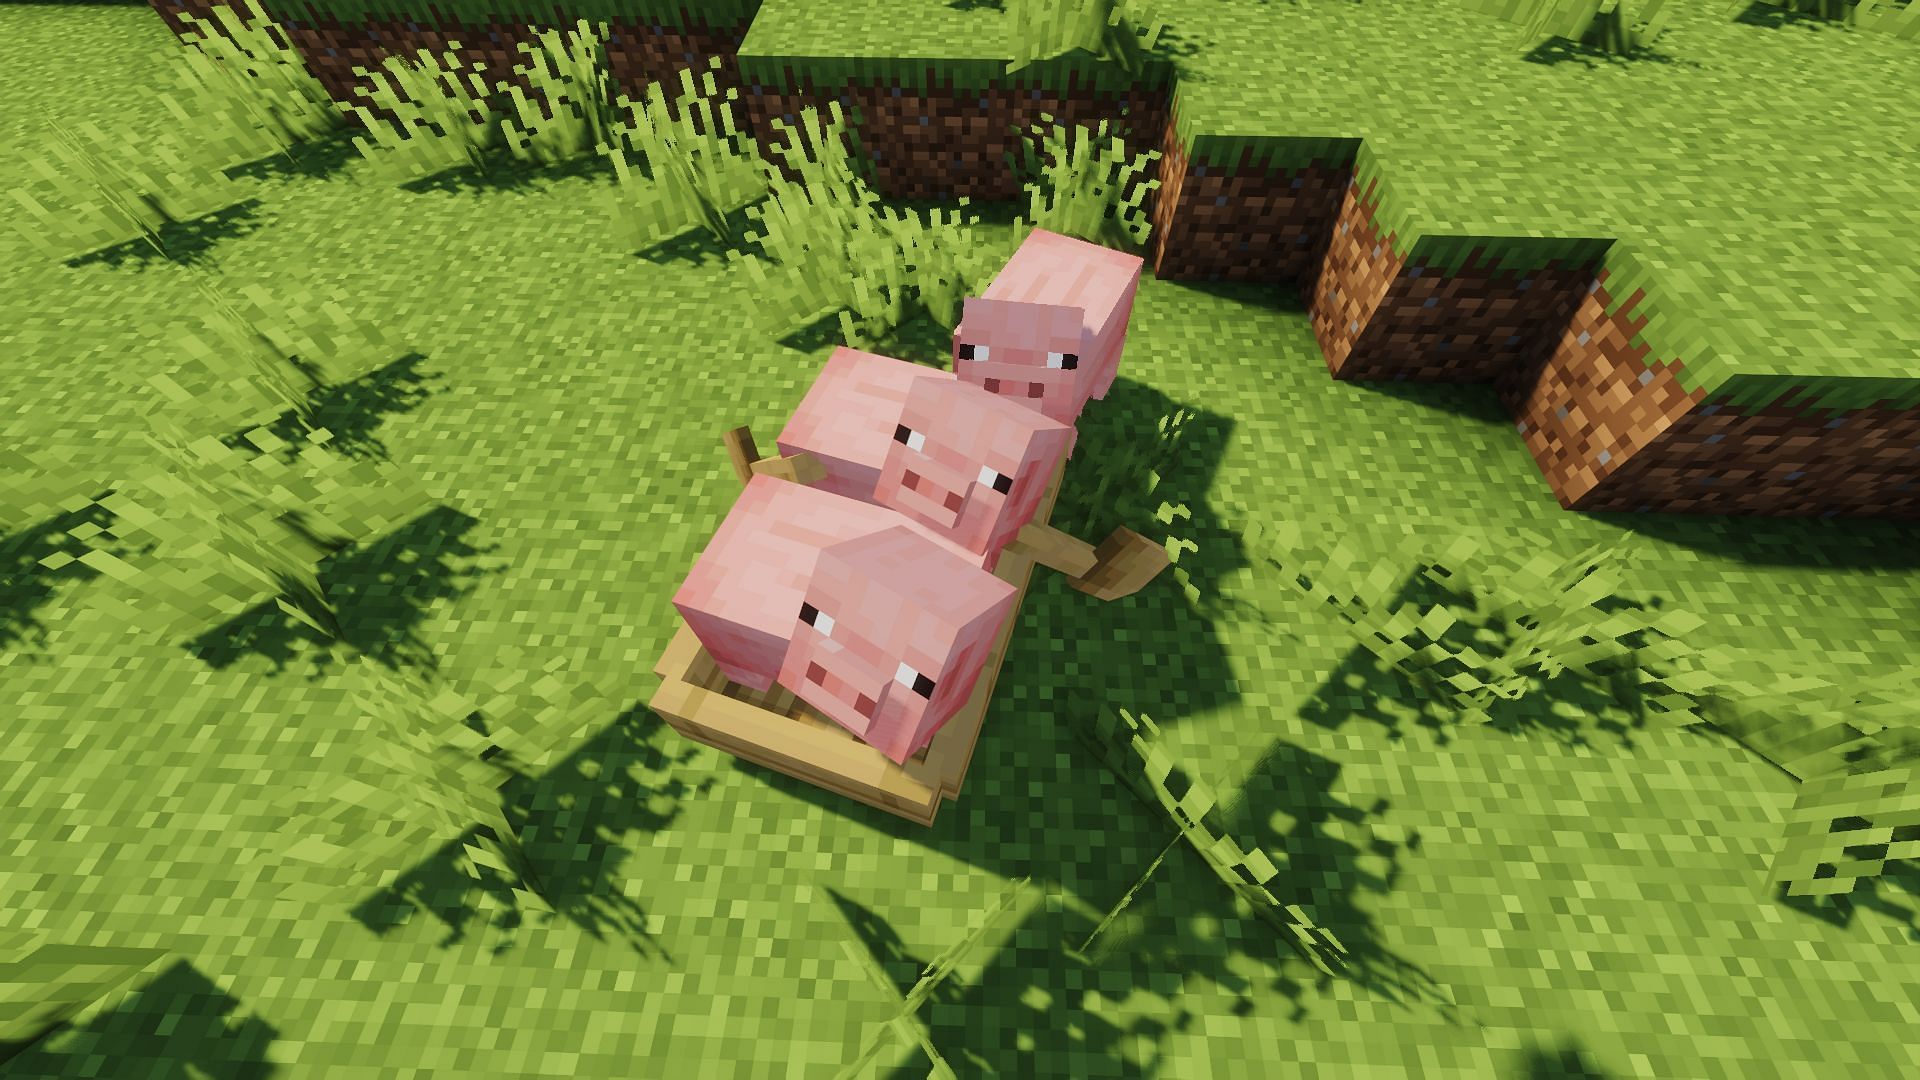 Two pigs trapped in a boat (Image via Minecraft)